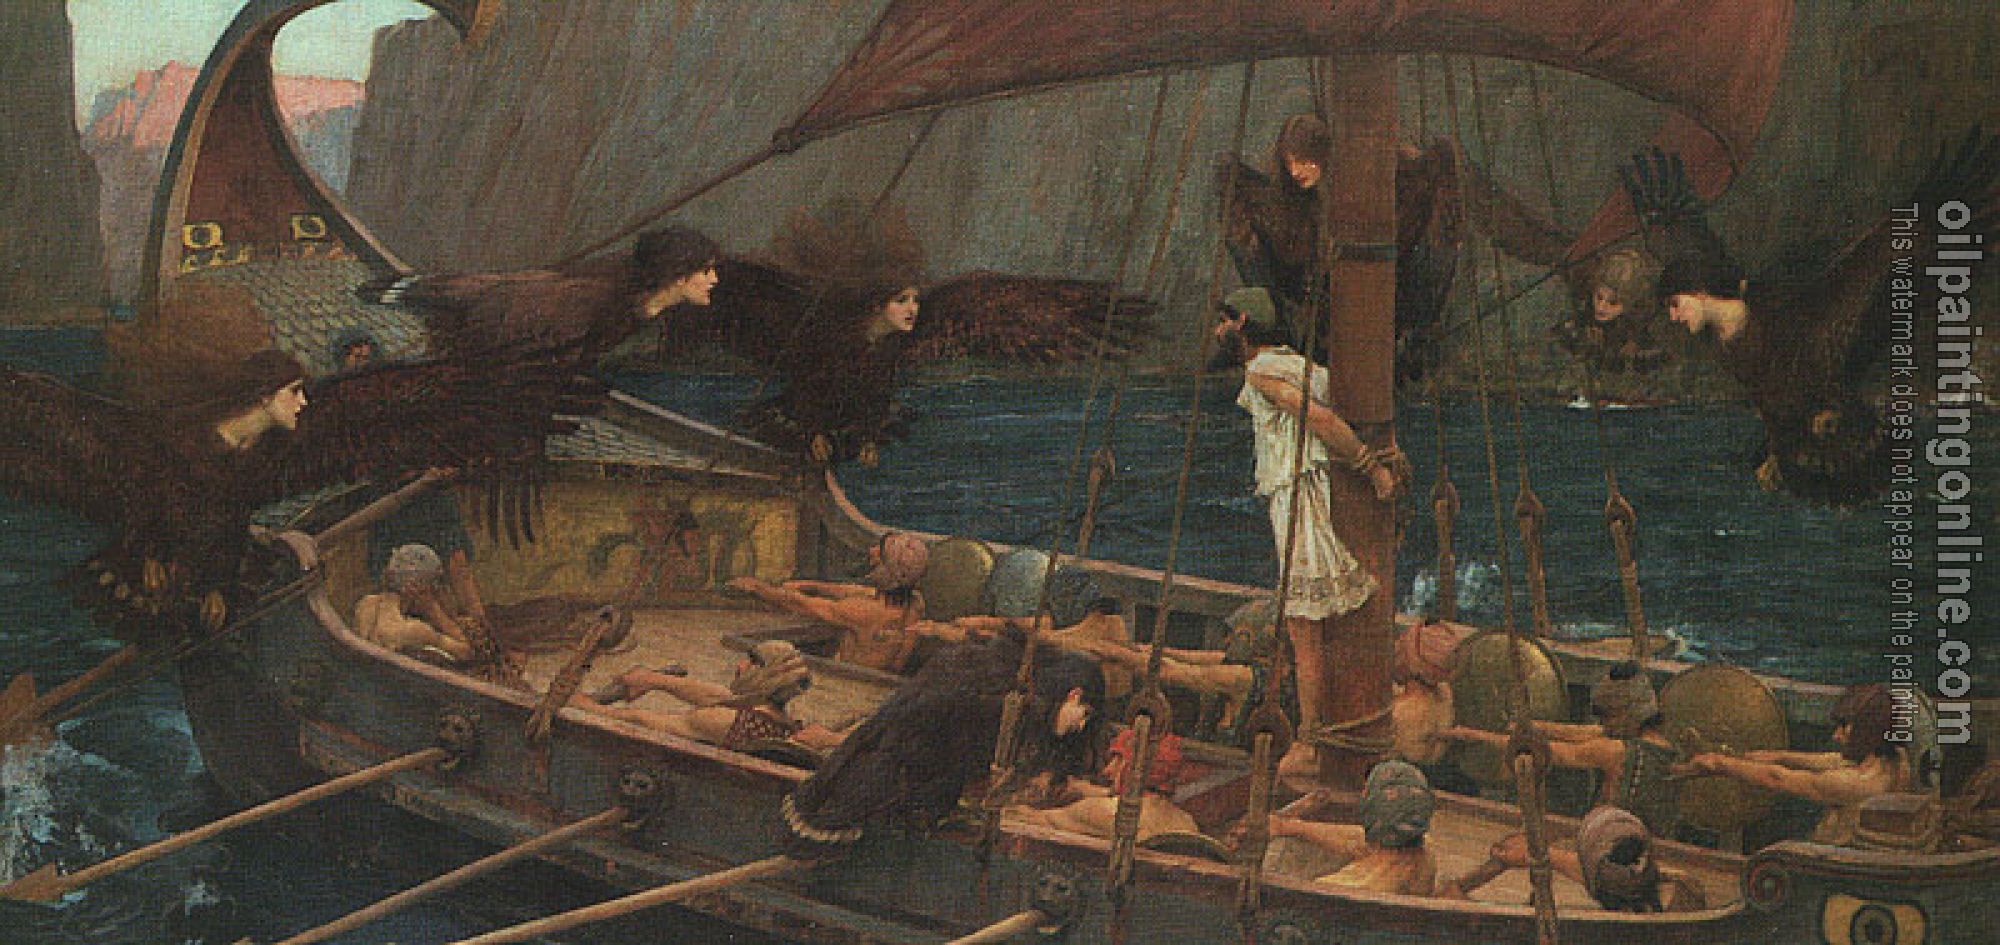 Waterhouse, John William - Ulysses and the Sirens